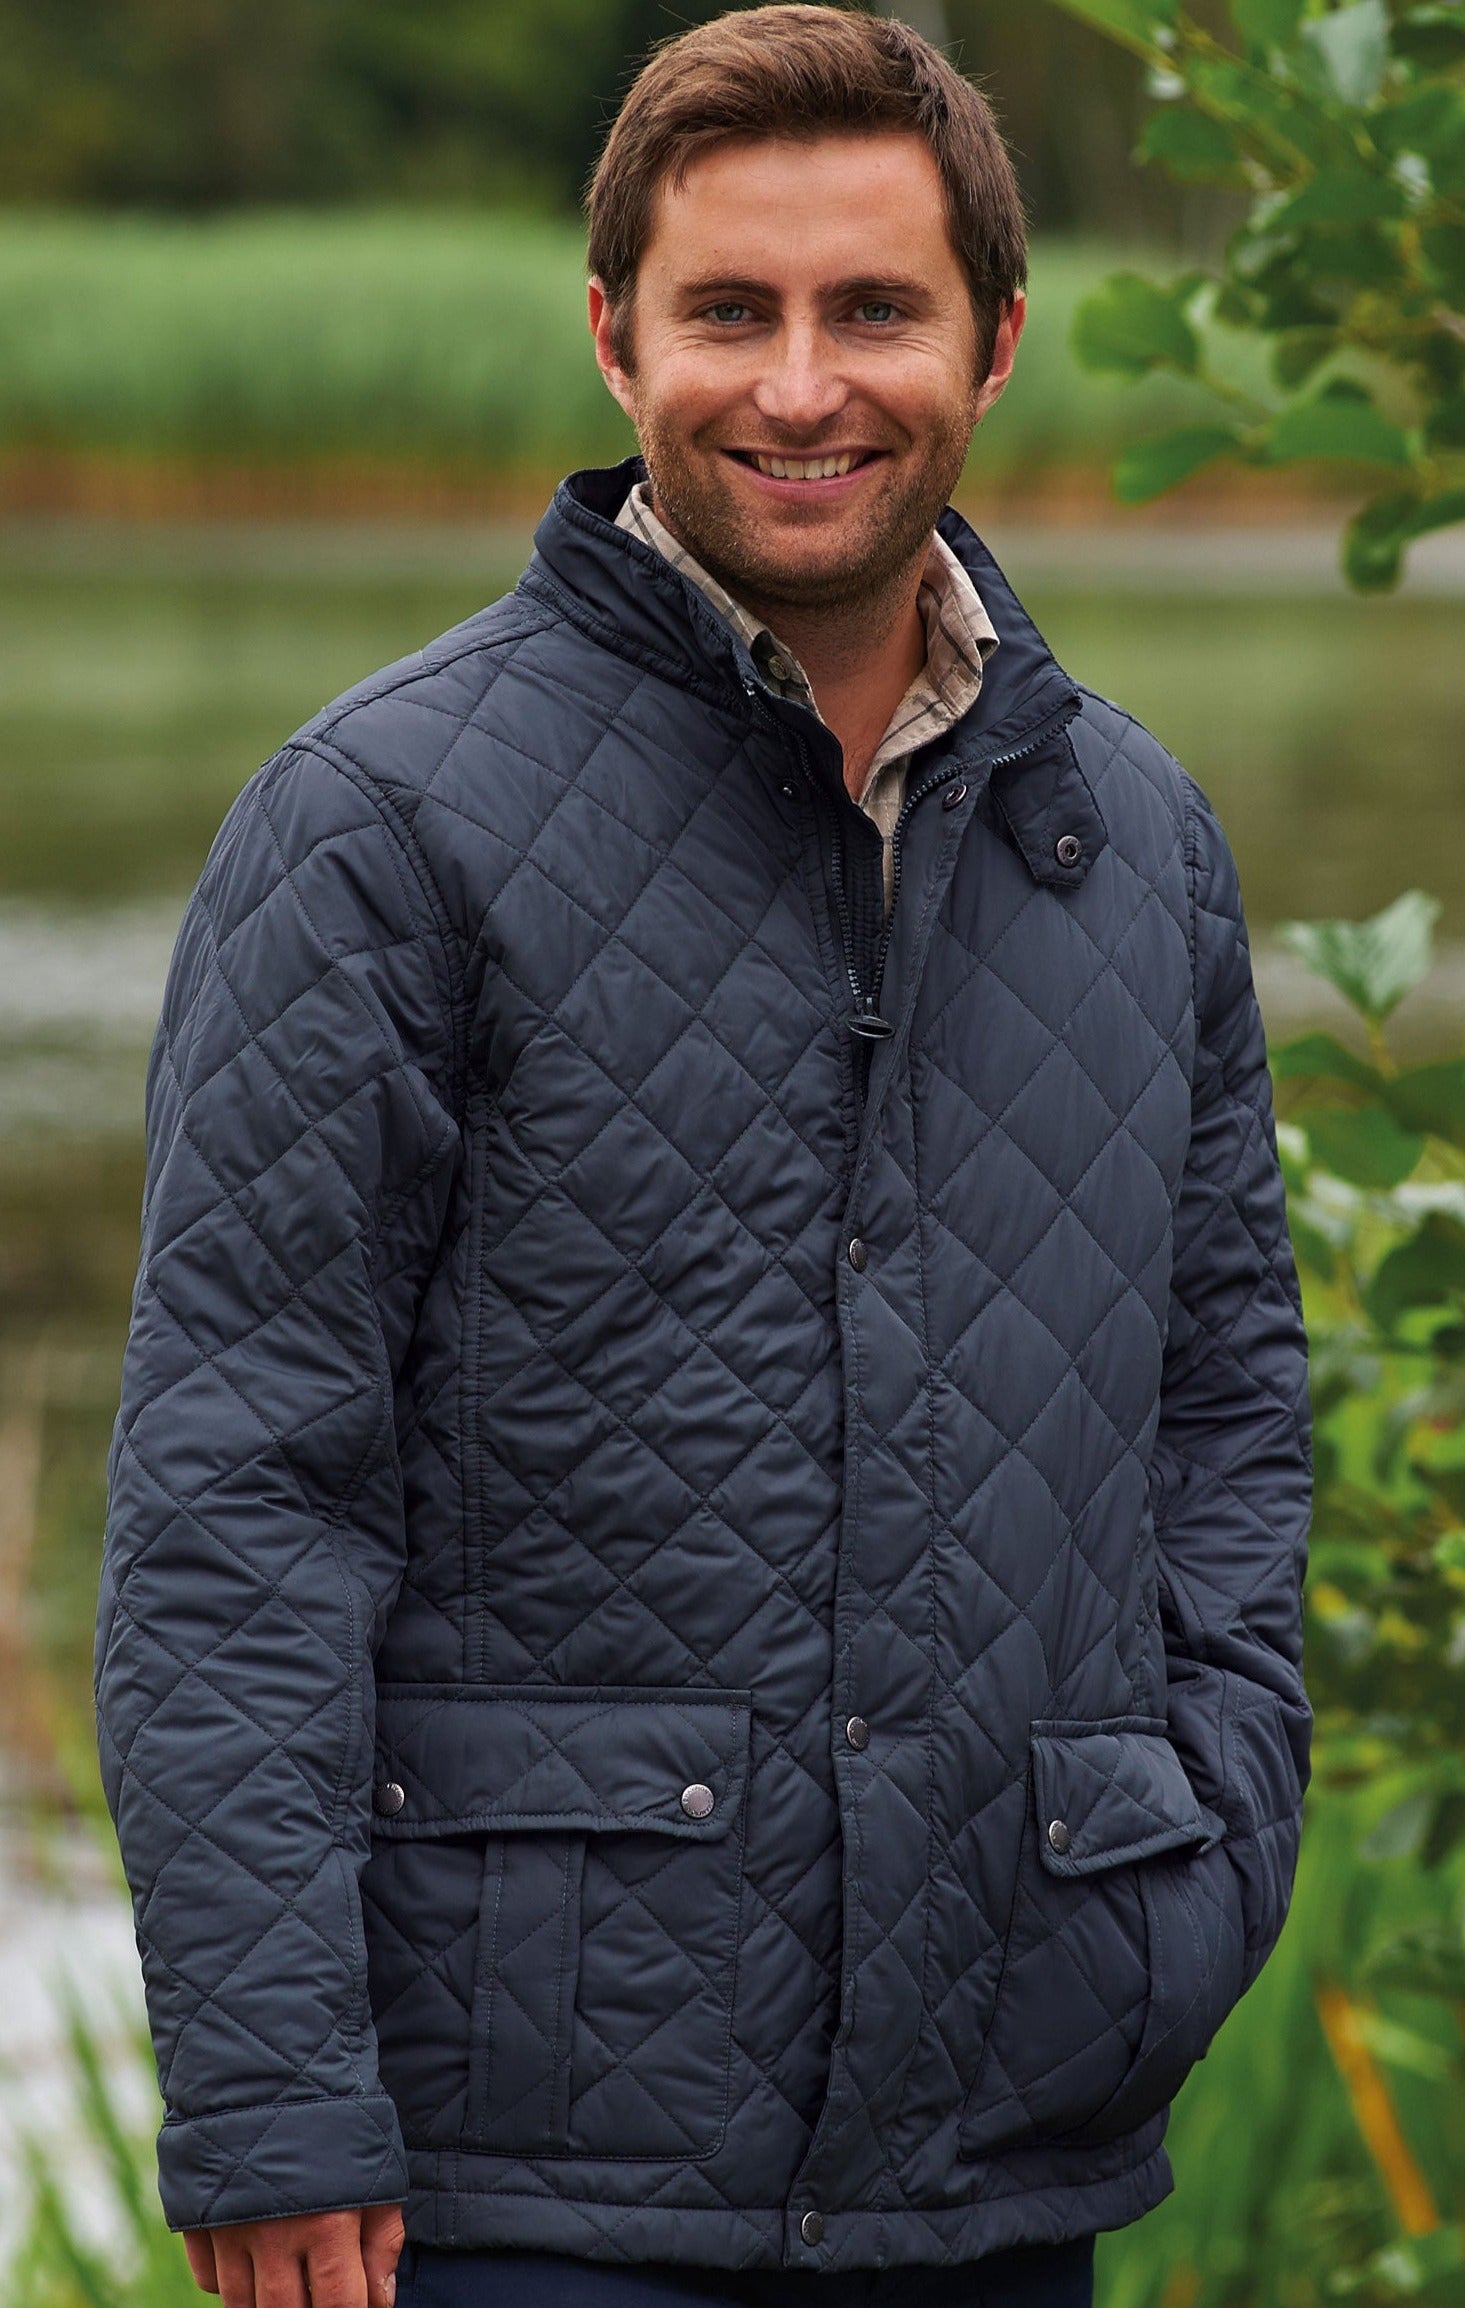 country estate quilted jacket